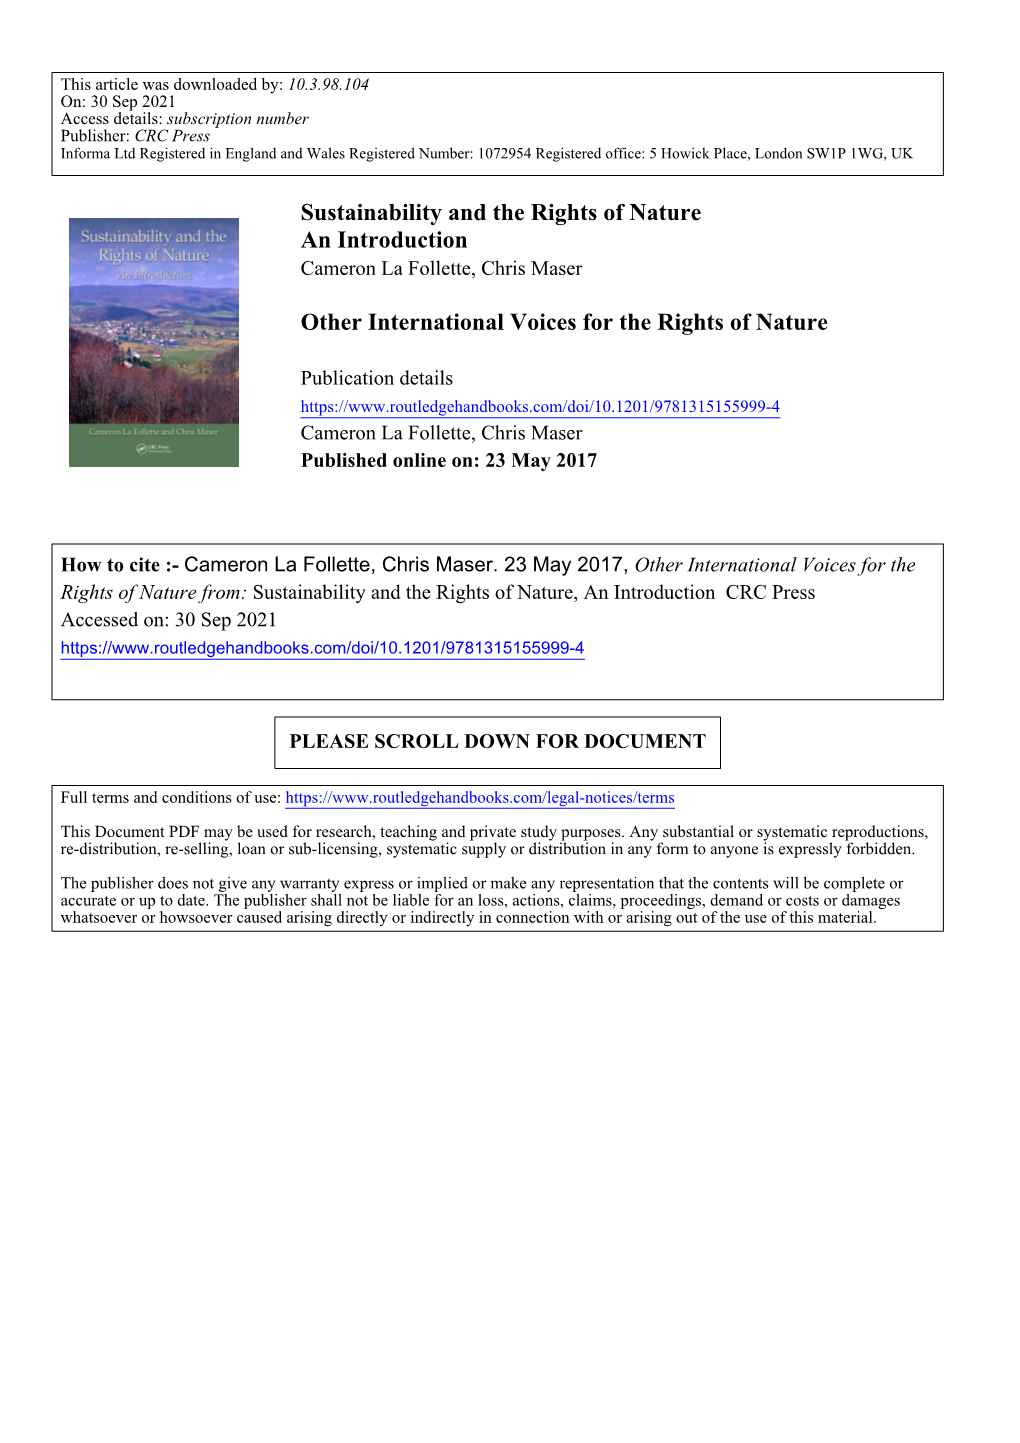 Sustainability and the Rights of Nature an Introduction Other International